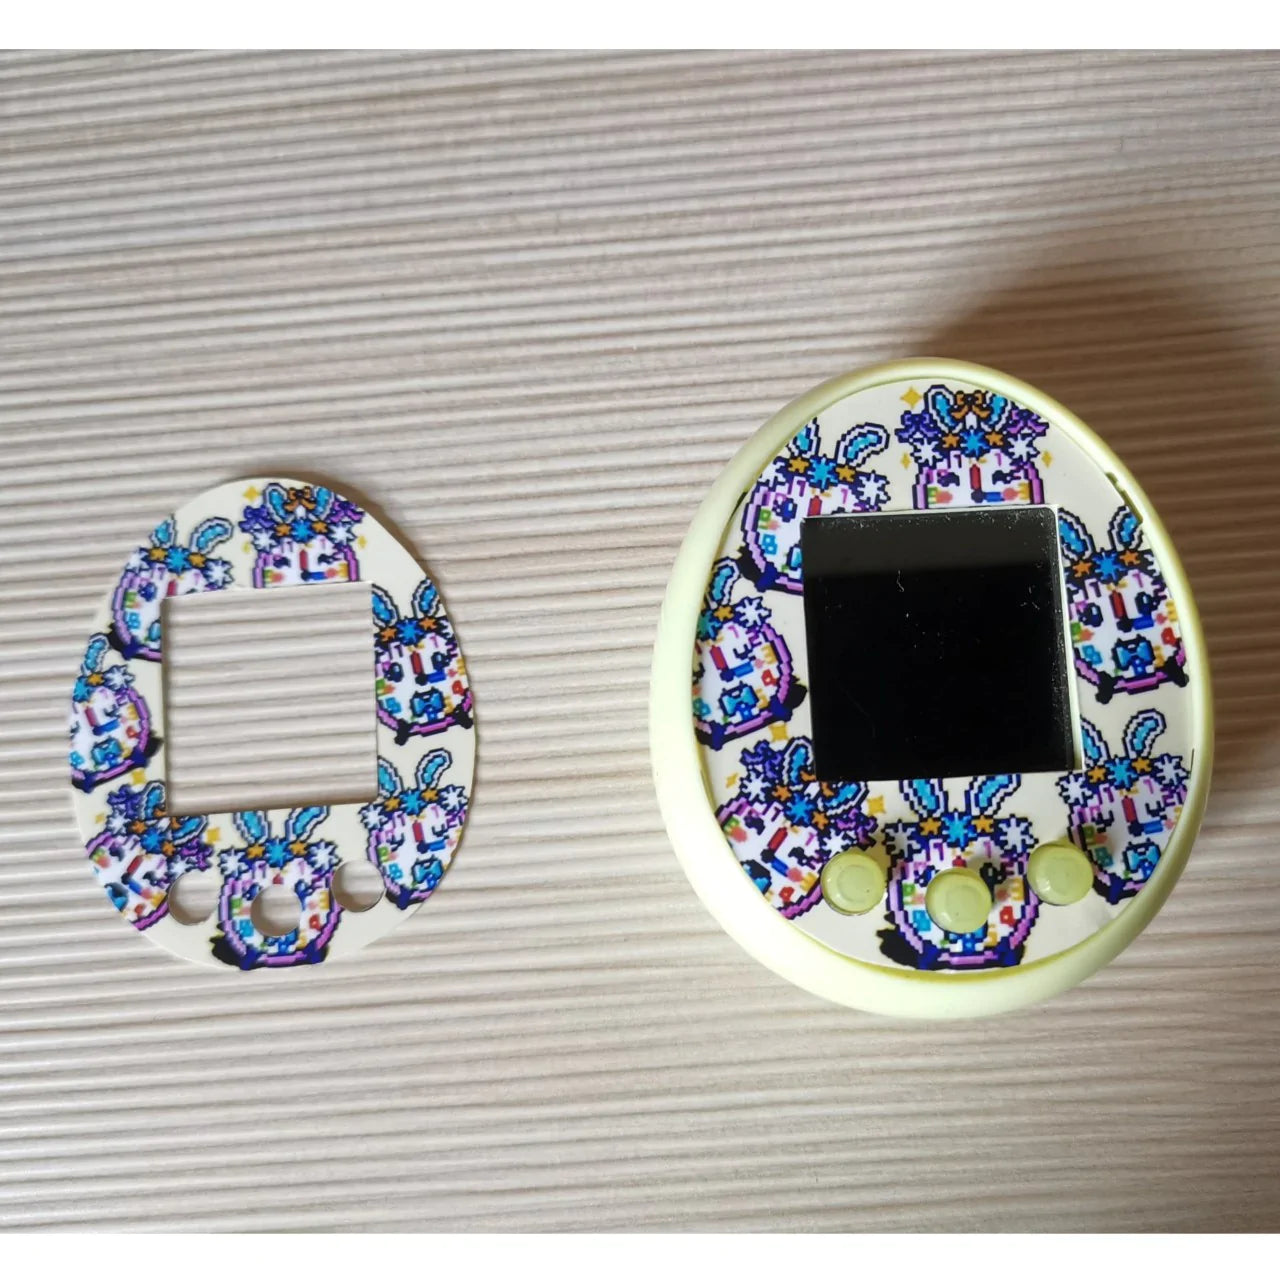 Tamagotchi Meets/On Faceplates - Clock face Fuzzy N Chic